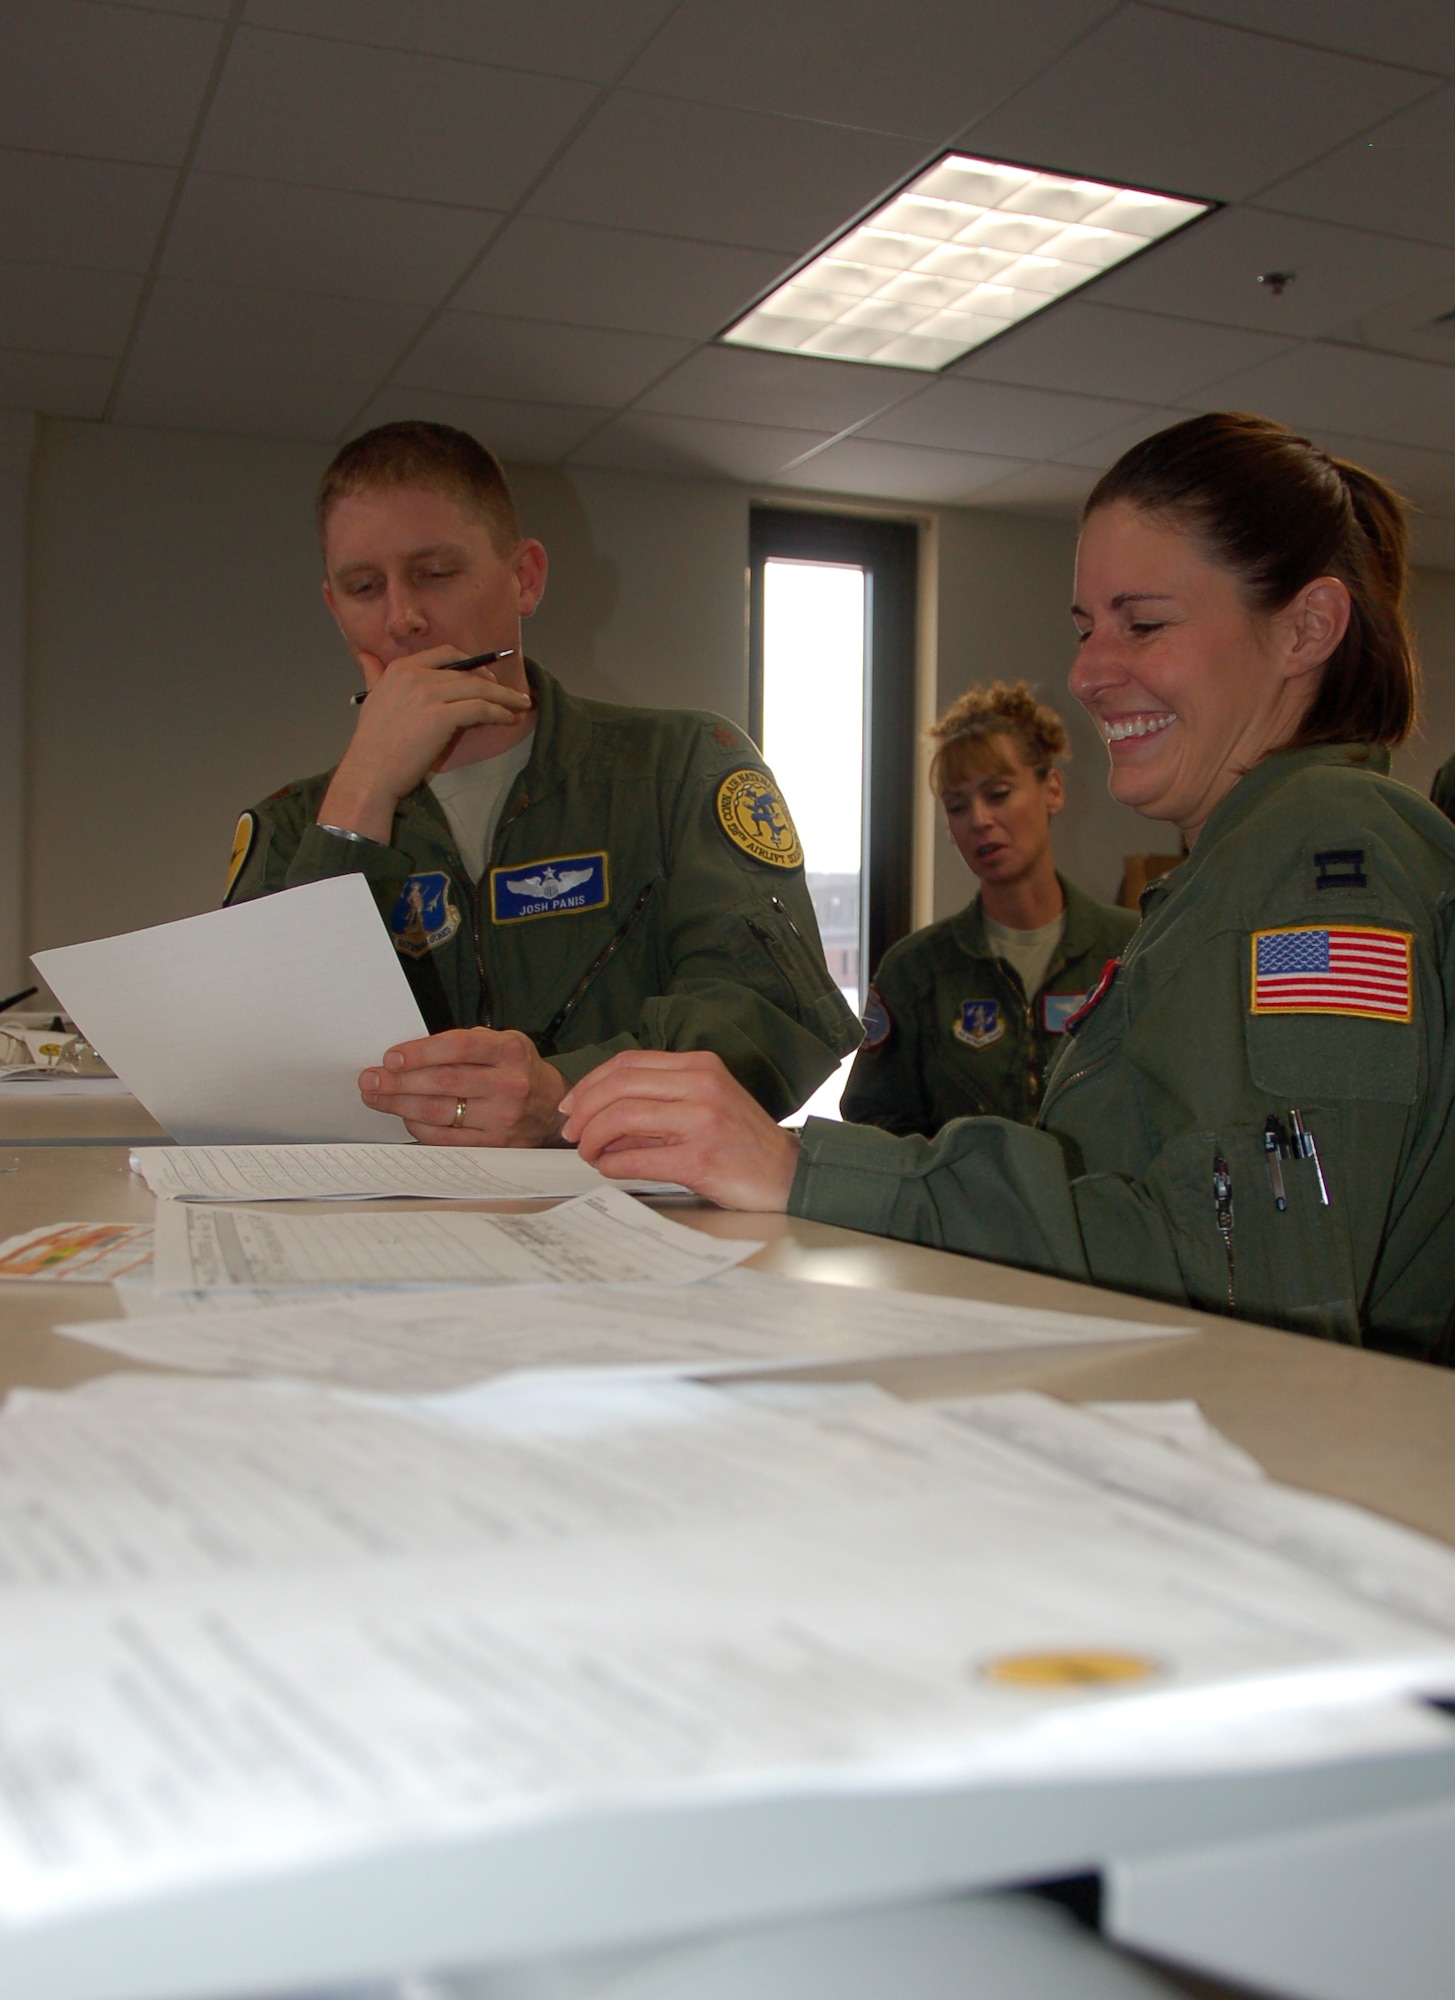 Maj. Josh Panis, a pilot assigned to the 118th Airlift Squadron, Capt. Rachel Leimbach, a navigator assigned to the 139th Airlift Squadron and Master Sgt. Jean Booth, a loadmaster assigned to the 139th Airlift Squadron, go over final preparations before embarking on the first locally-generated sortie aboard a C-130H Hercules aircraft Dec. 19, 2013, at Bradley Air National Guard Base, East Granby, Conn.  The aircrew was comprised of Airmen from the Connecticut Air National Guard, the New York Air National Guard and the U.S.A.F.  (U.S. Air National Guard photo by Maj. Bryon Turner)